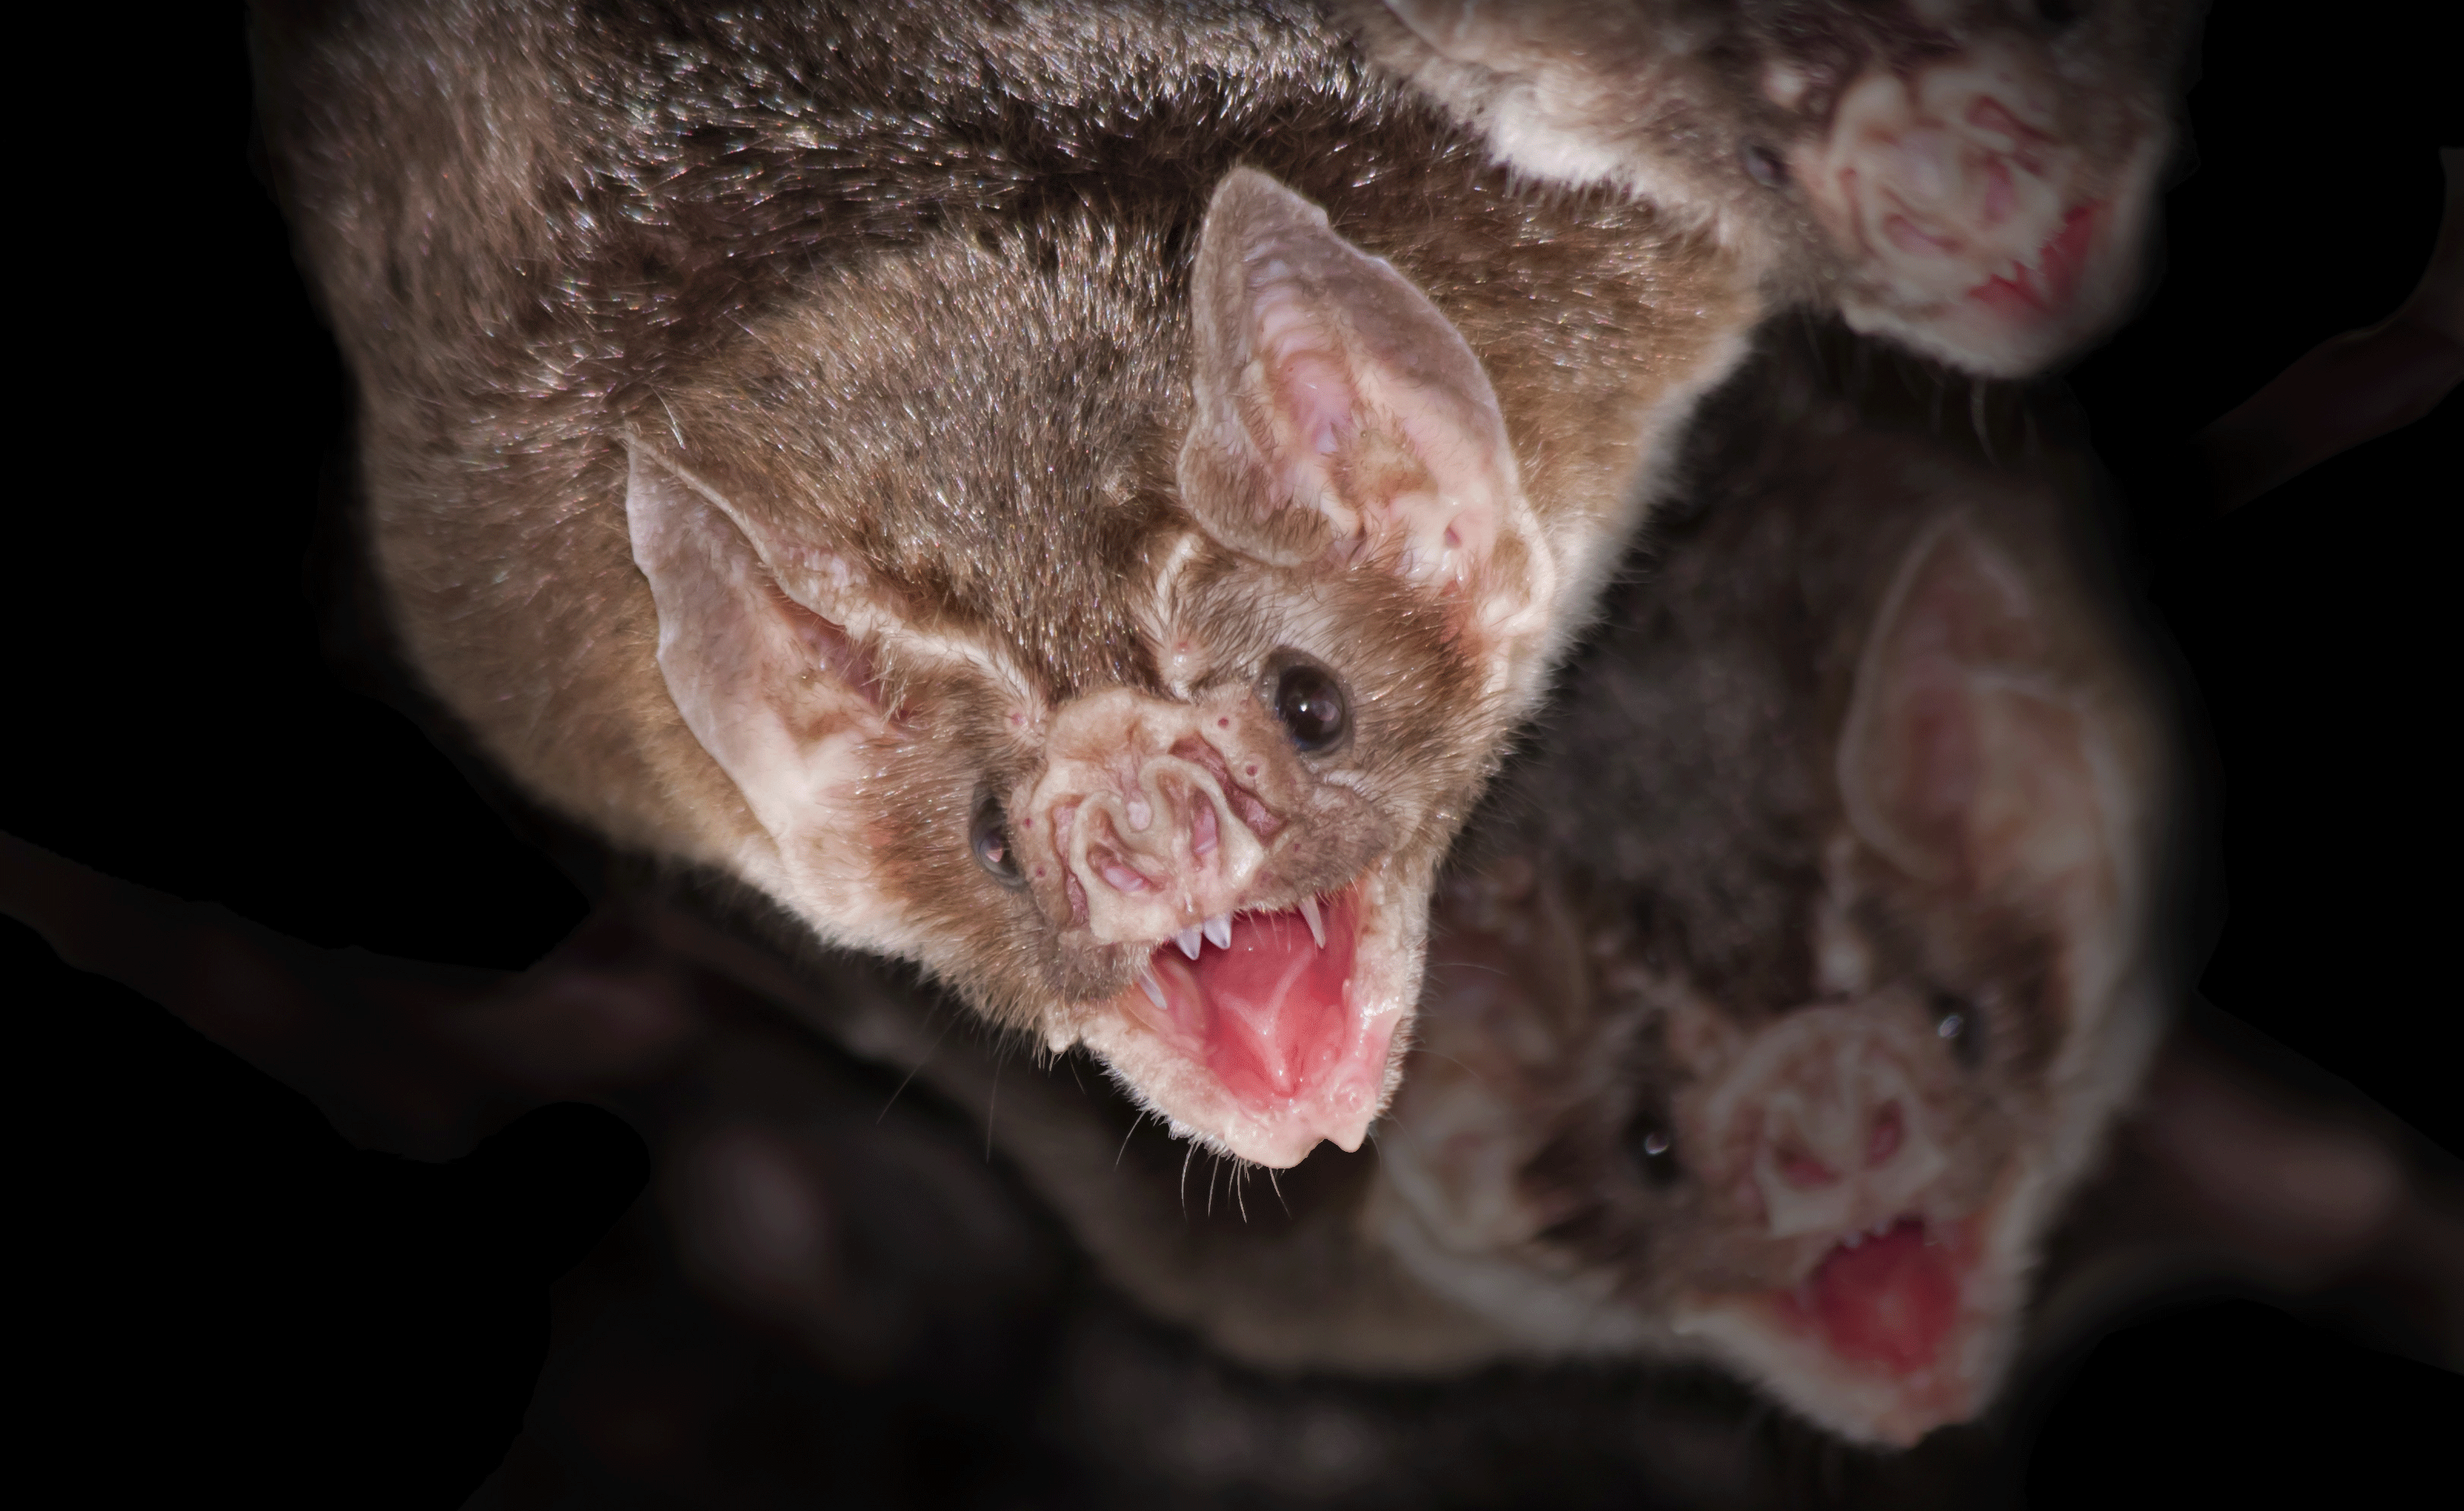 Two vampire bats hanging upside down with their mouths open.